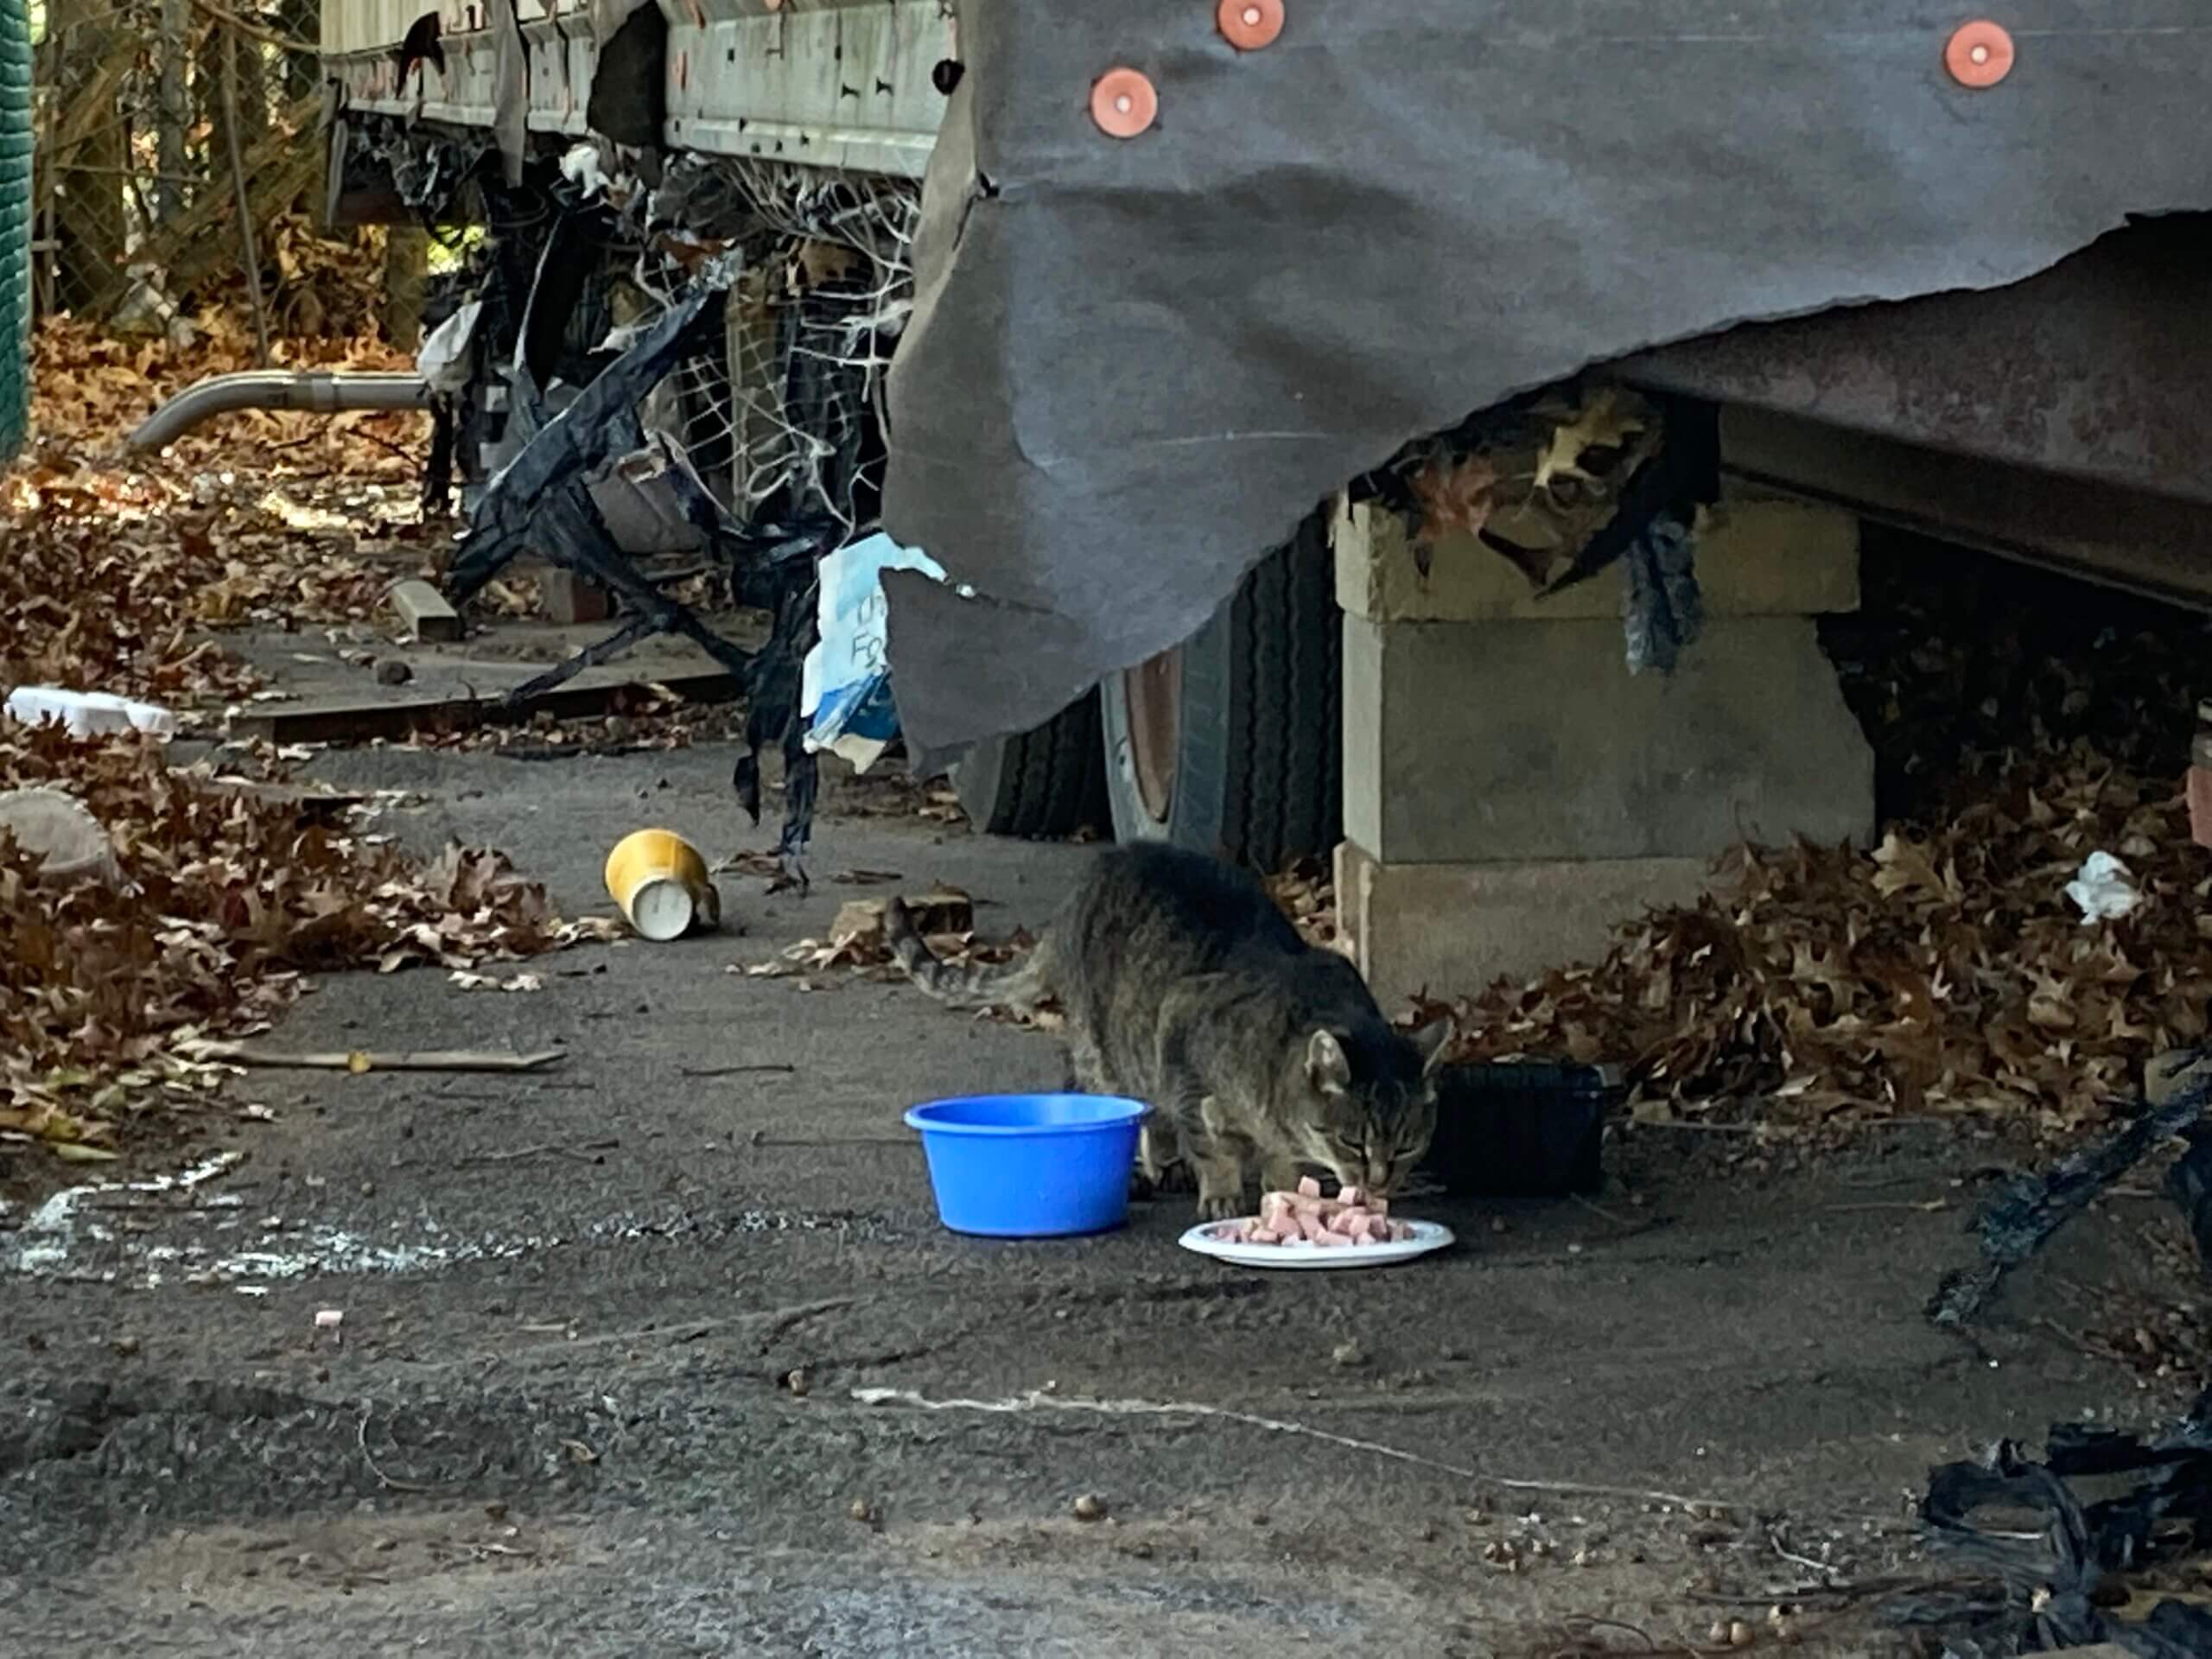 A brown cat approaches a dish of wet food placed under a trailer in a parking lot.